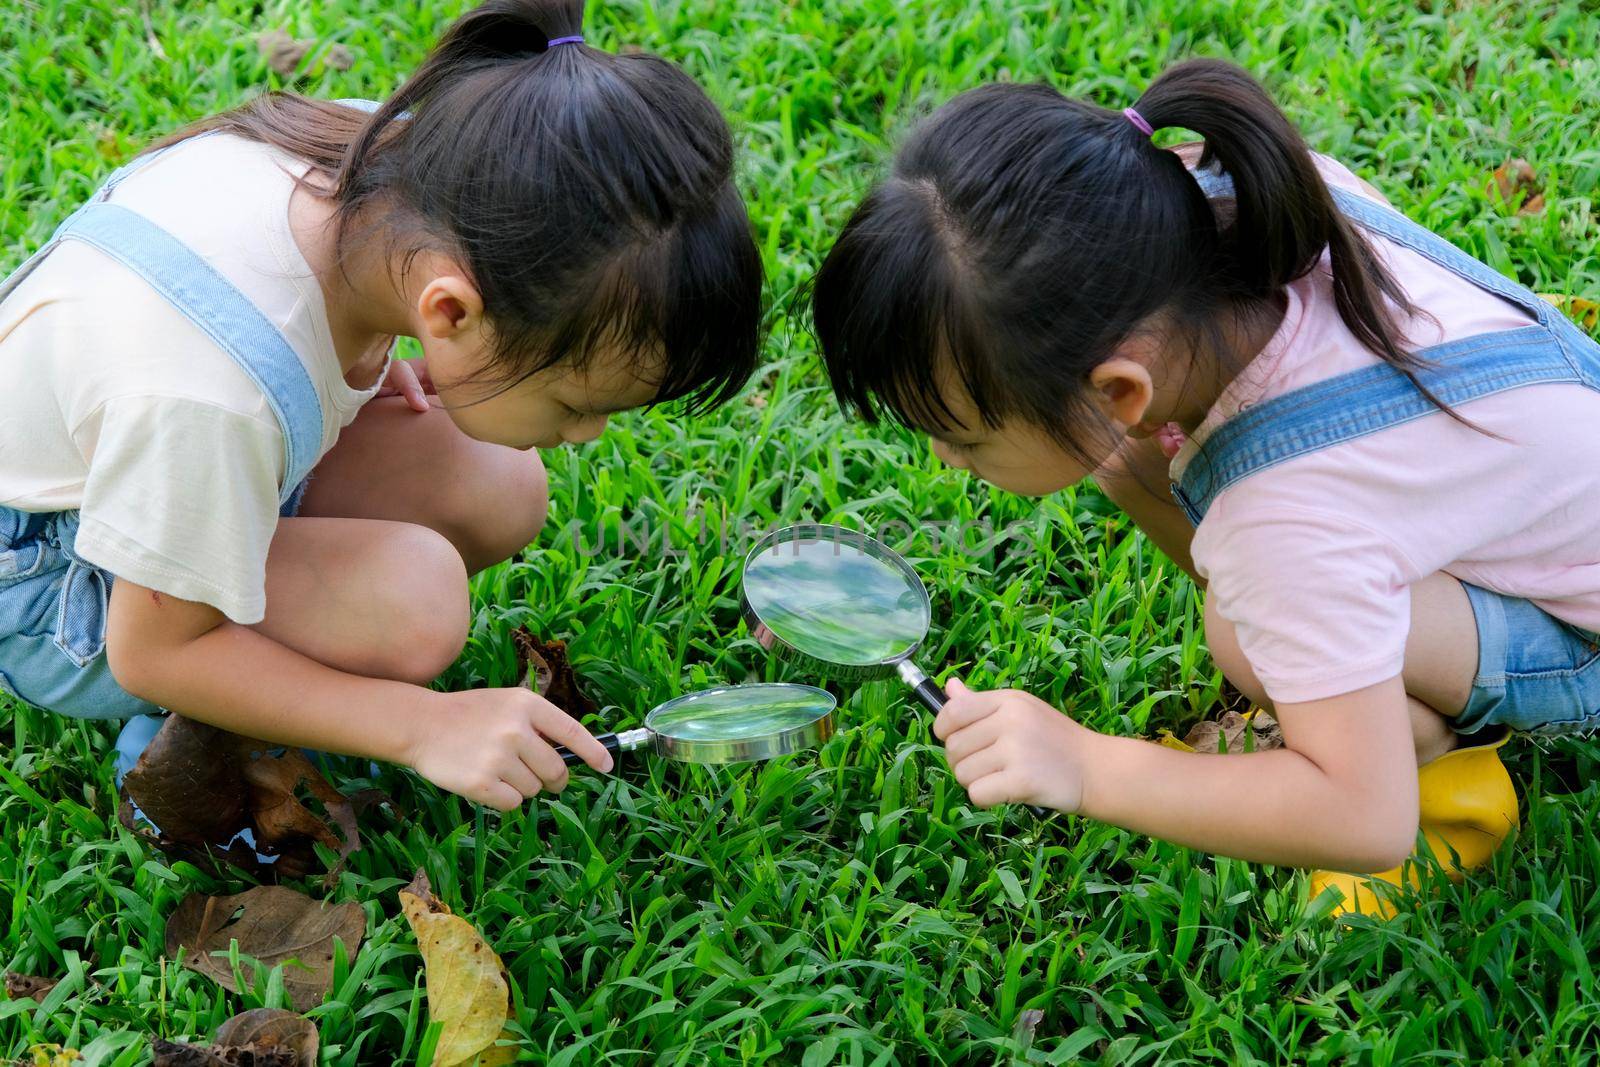 Children learn and explore nature with an outdoor magnifying glass. Curious child looks through a magnifying glass at the trees in the park.  Two little sisters playing with magnifying glass. by TEERASAK